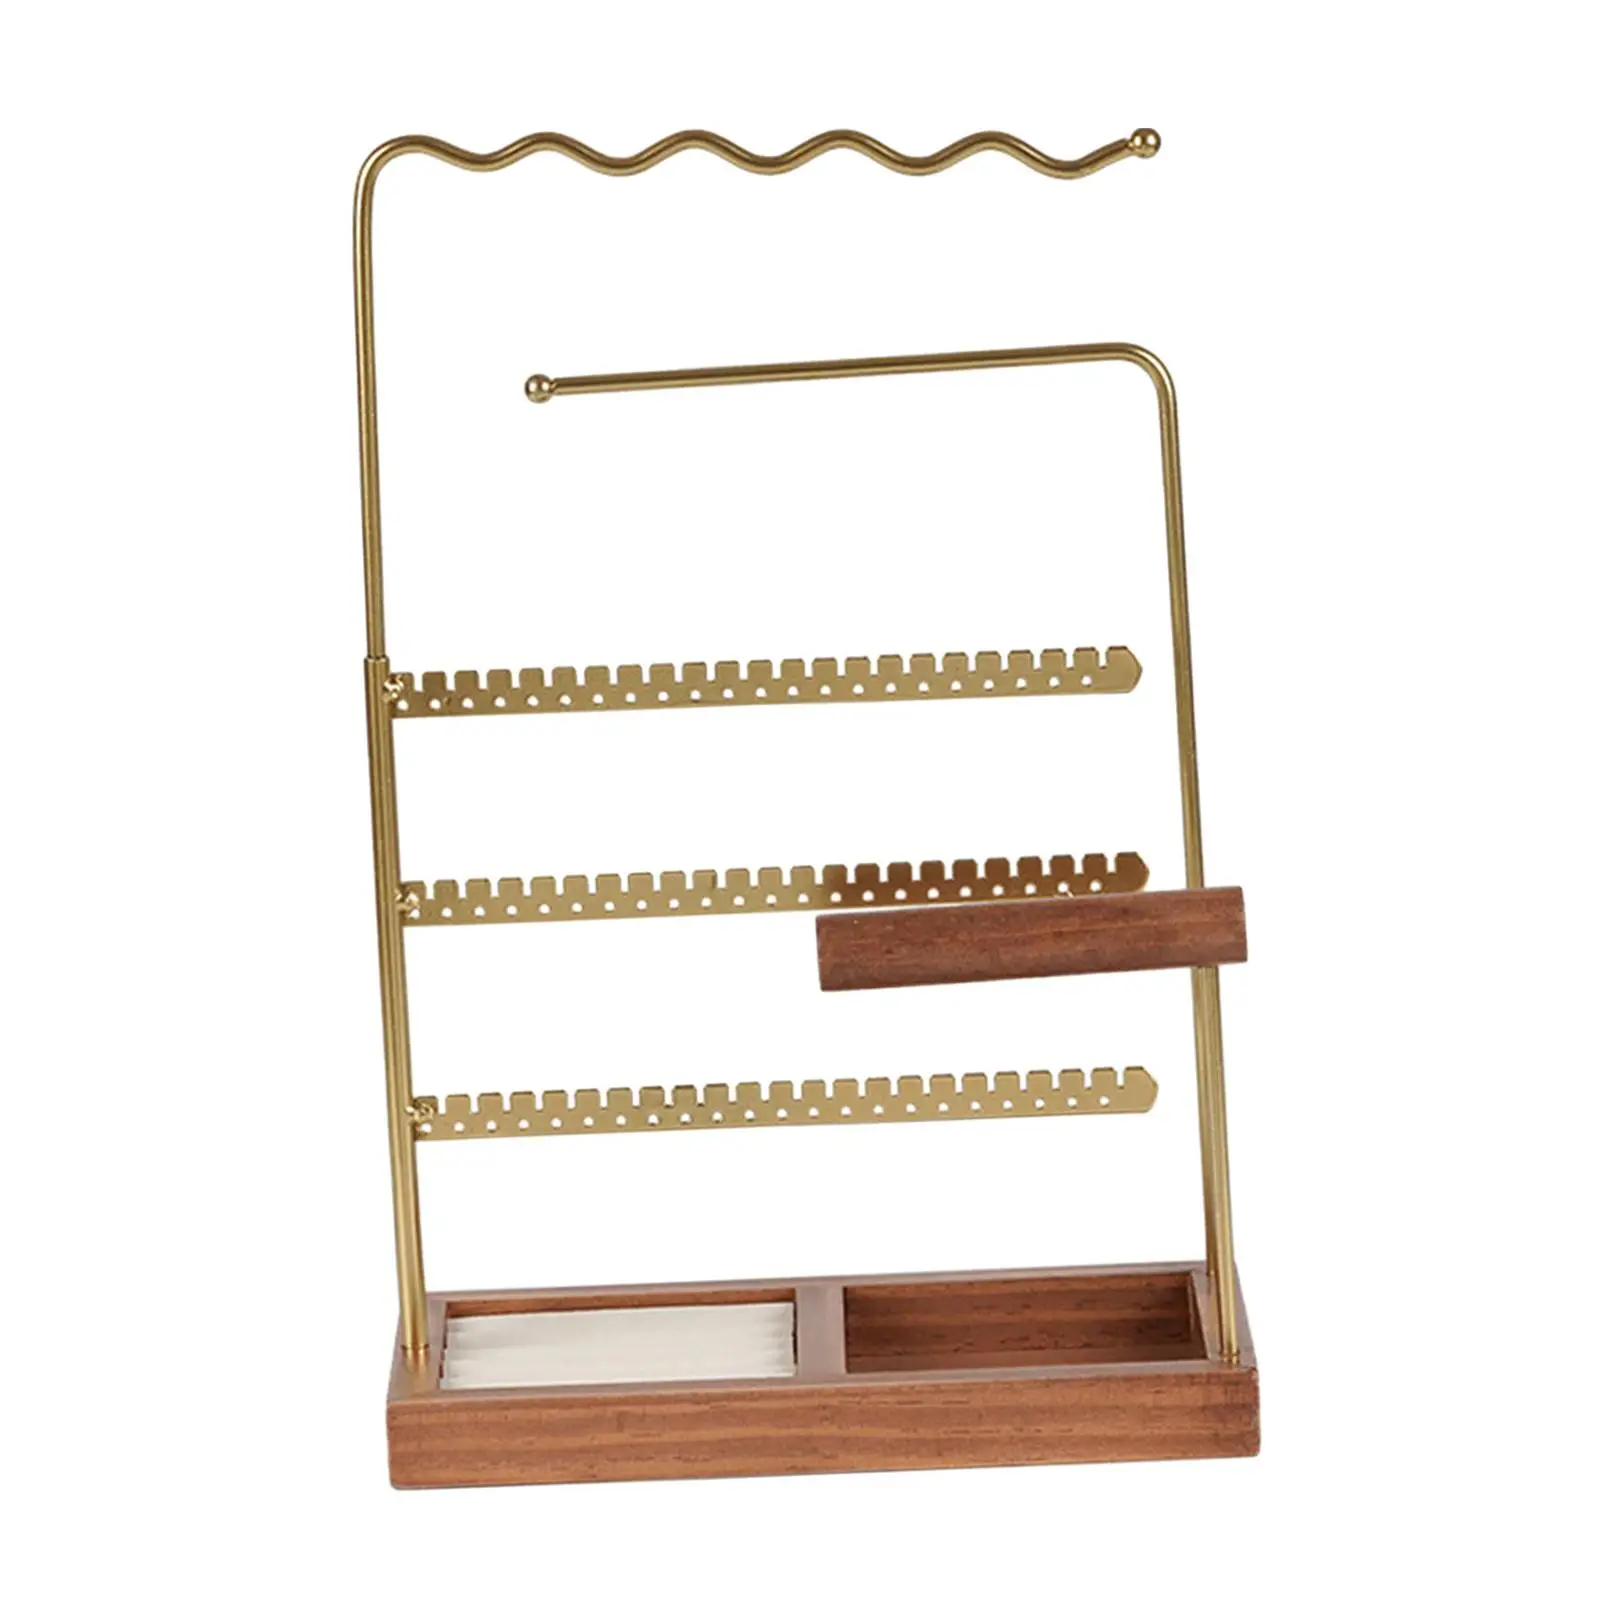 Jewelry Organizer Stand Multi Purpose with Tray for Rings Bangle Showcase